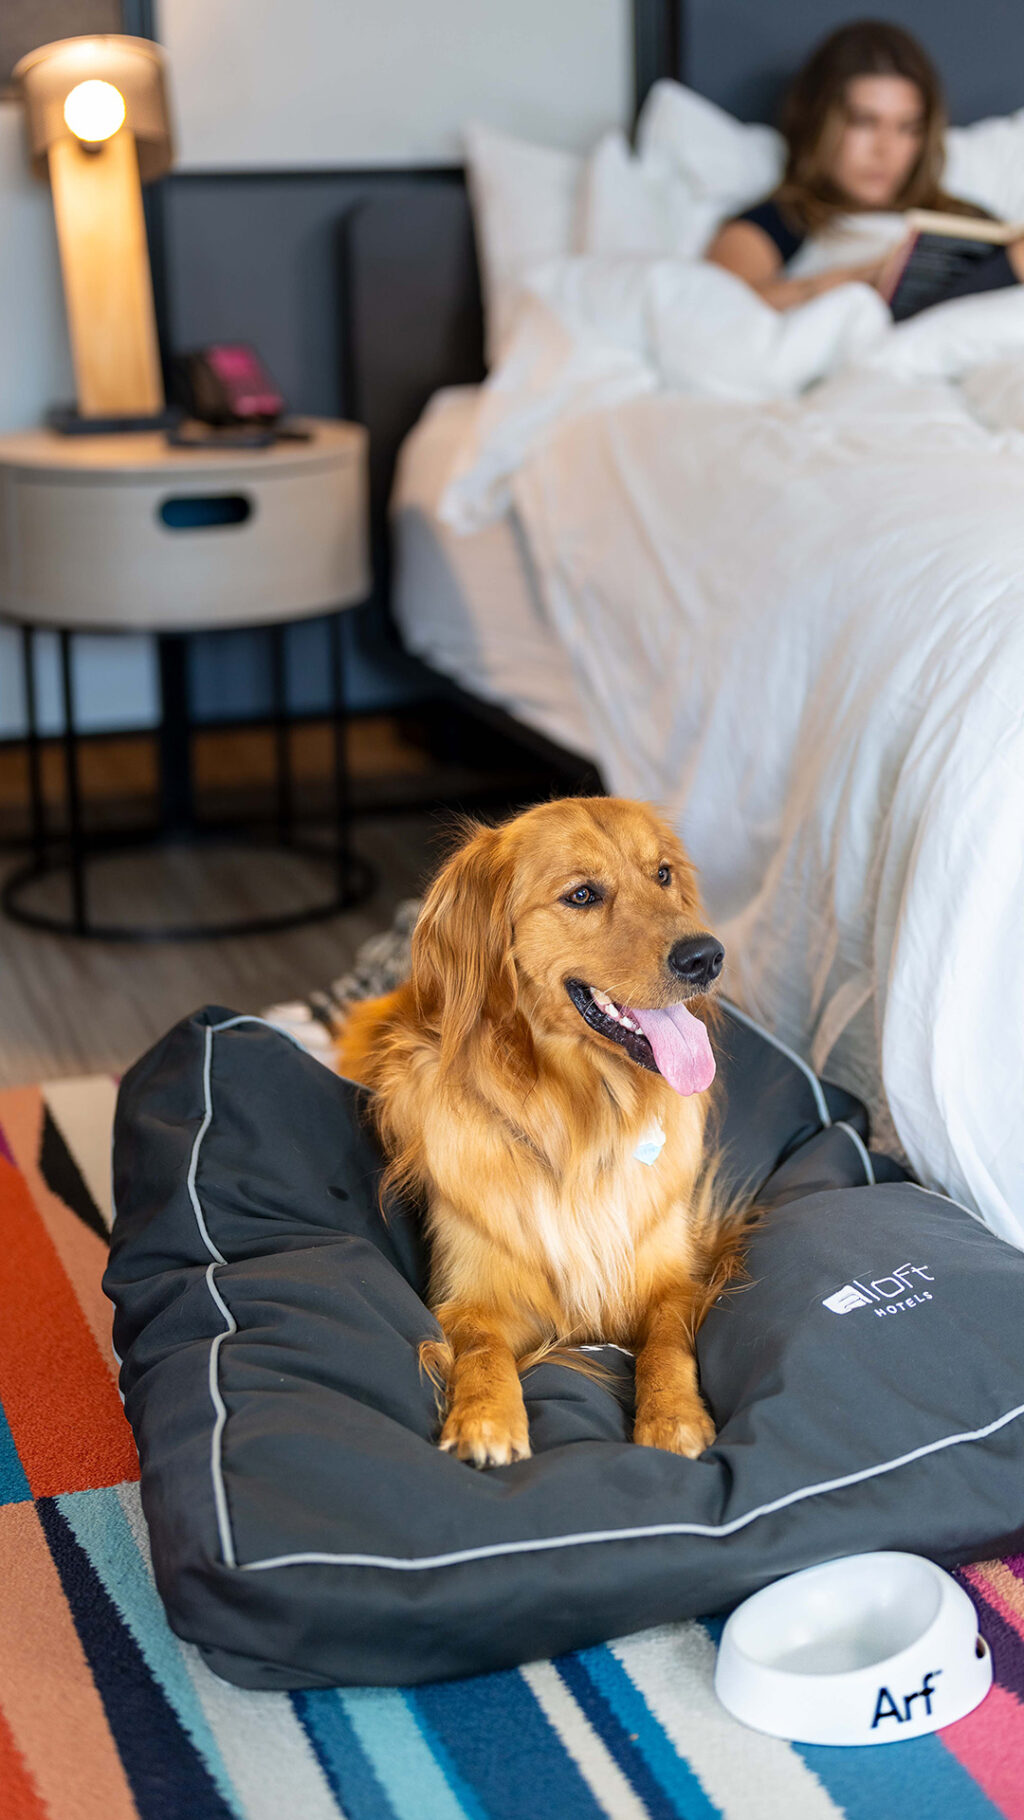 long-haired dog lying on an Aloft-branded pet bed in a hotel room